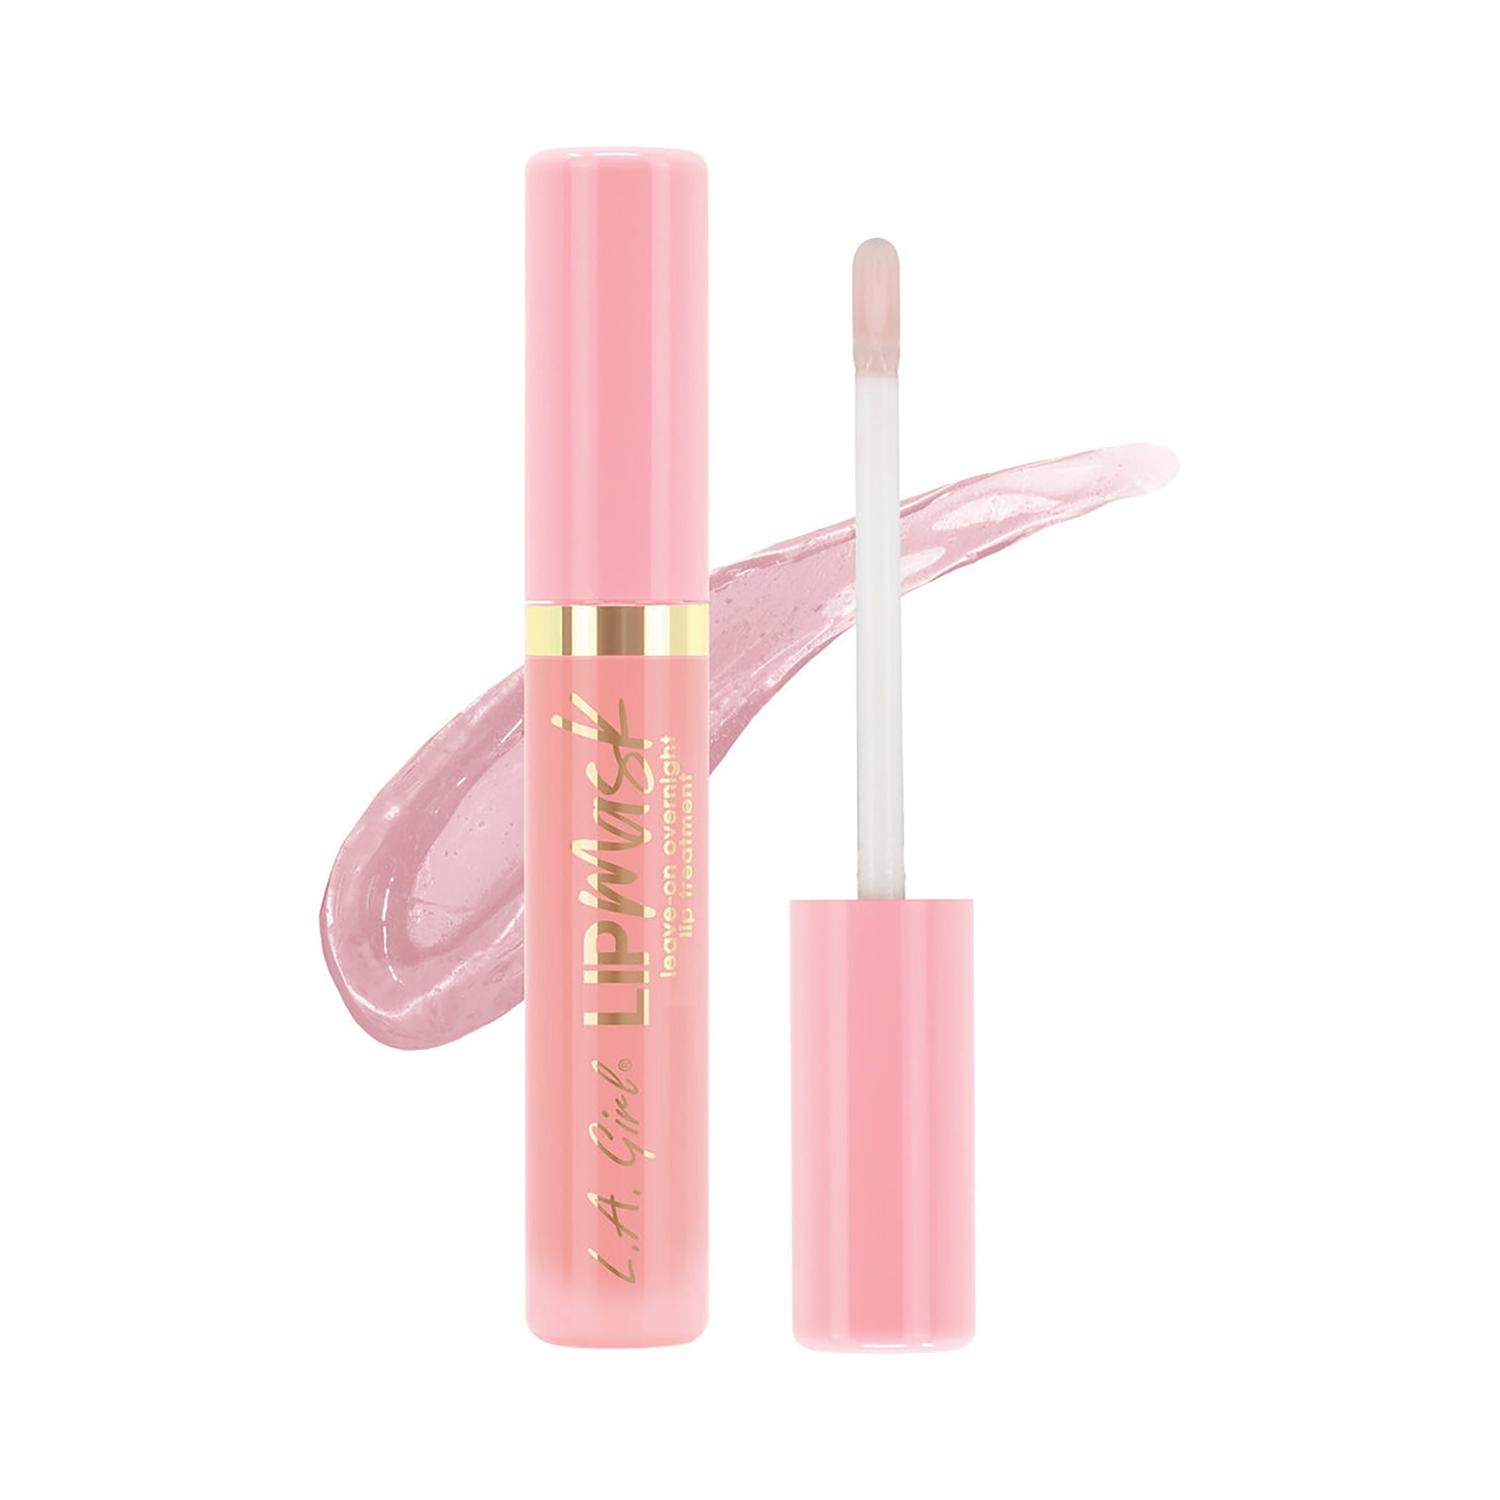 l.a. girl leave on overnight lip mask - sweet berry (3ml)